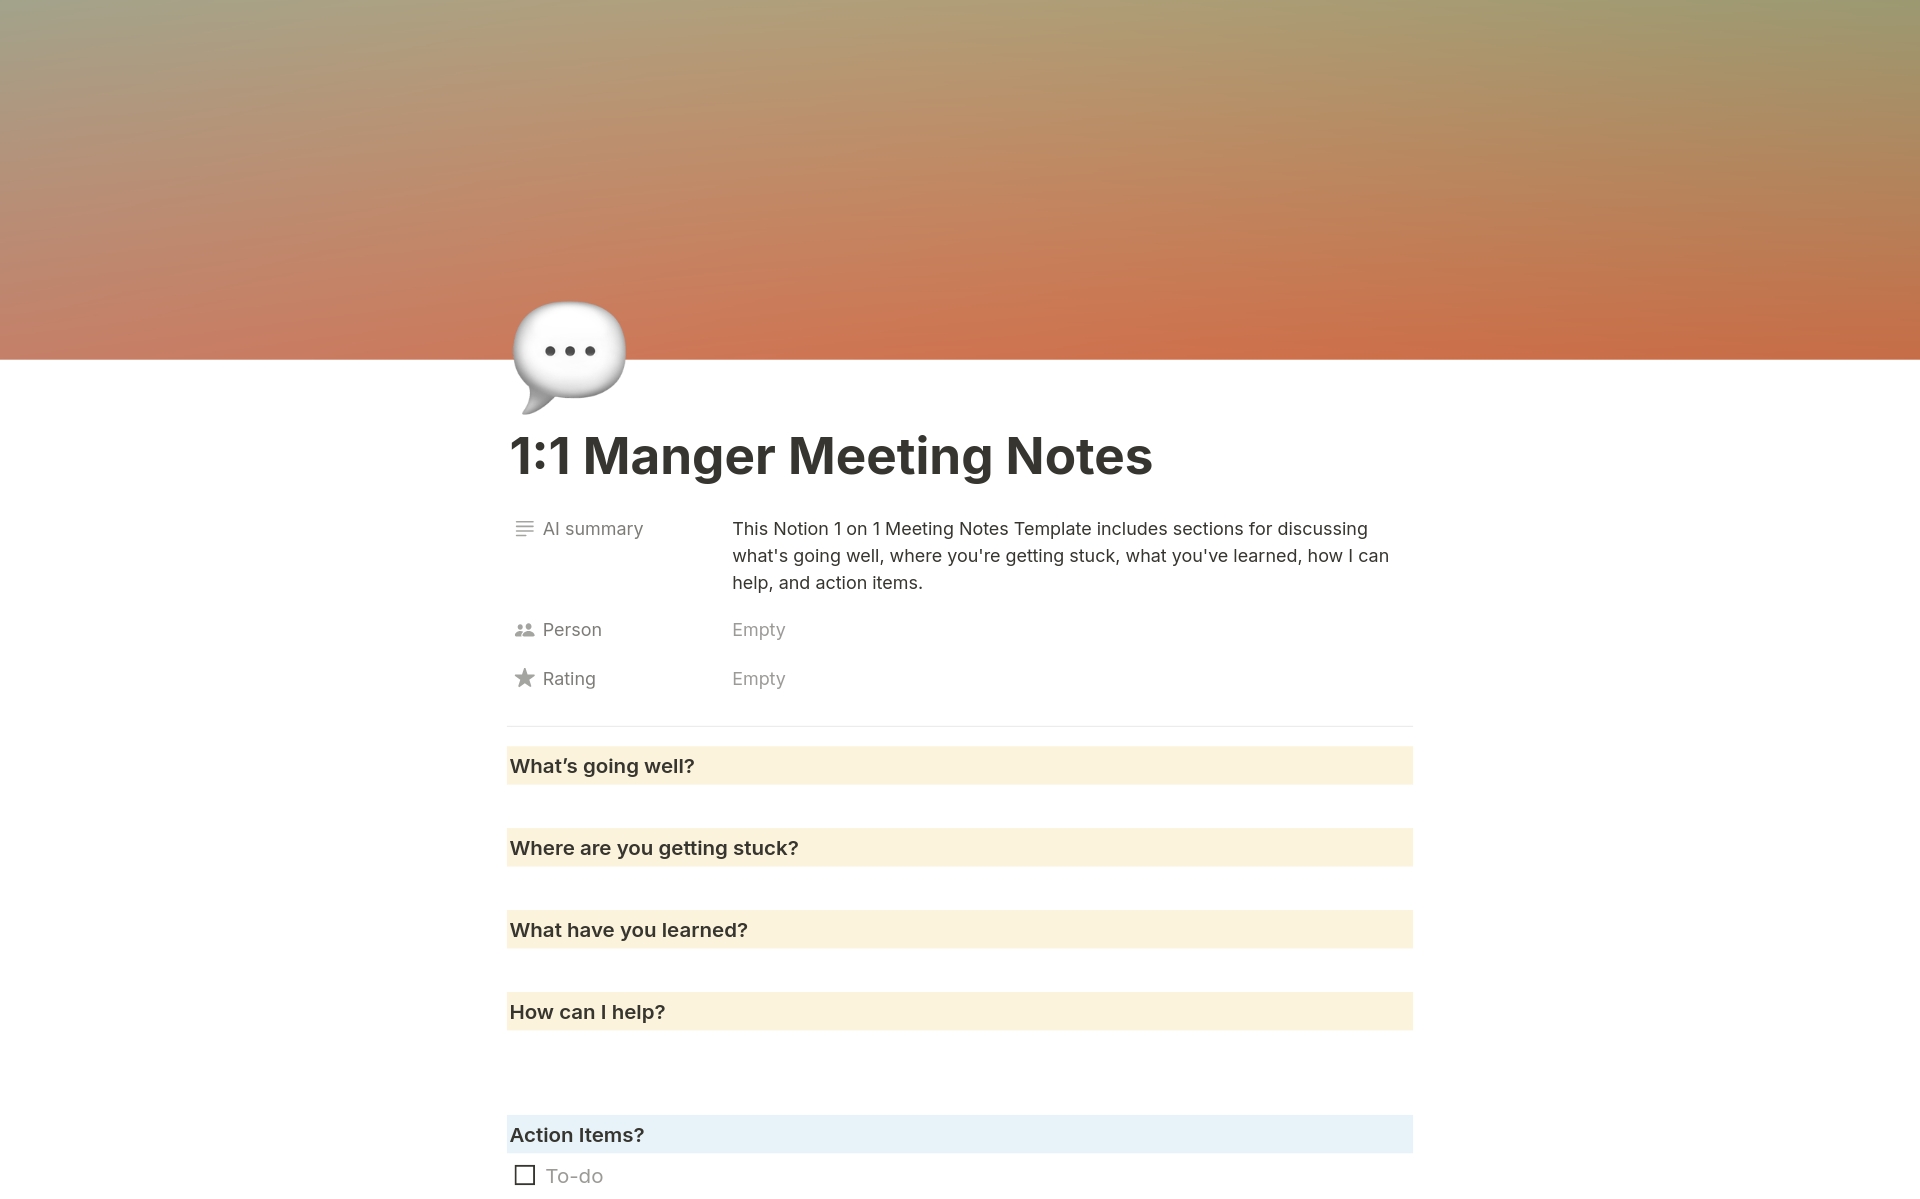 Use this simple four-question framework to structure 1 on 1 meeting with your team! Gather feedback, action items, and use Notion AI to automate a summary of your meeting. 

